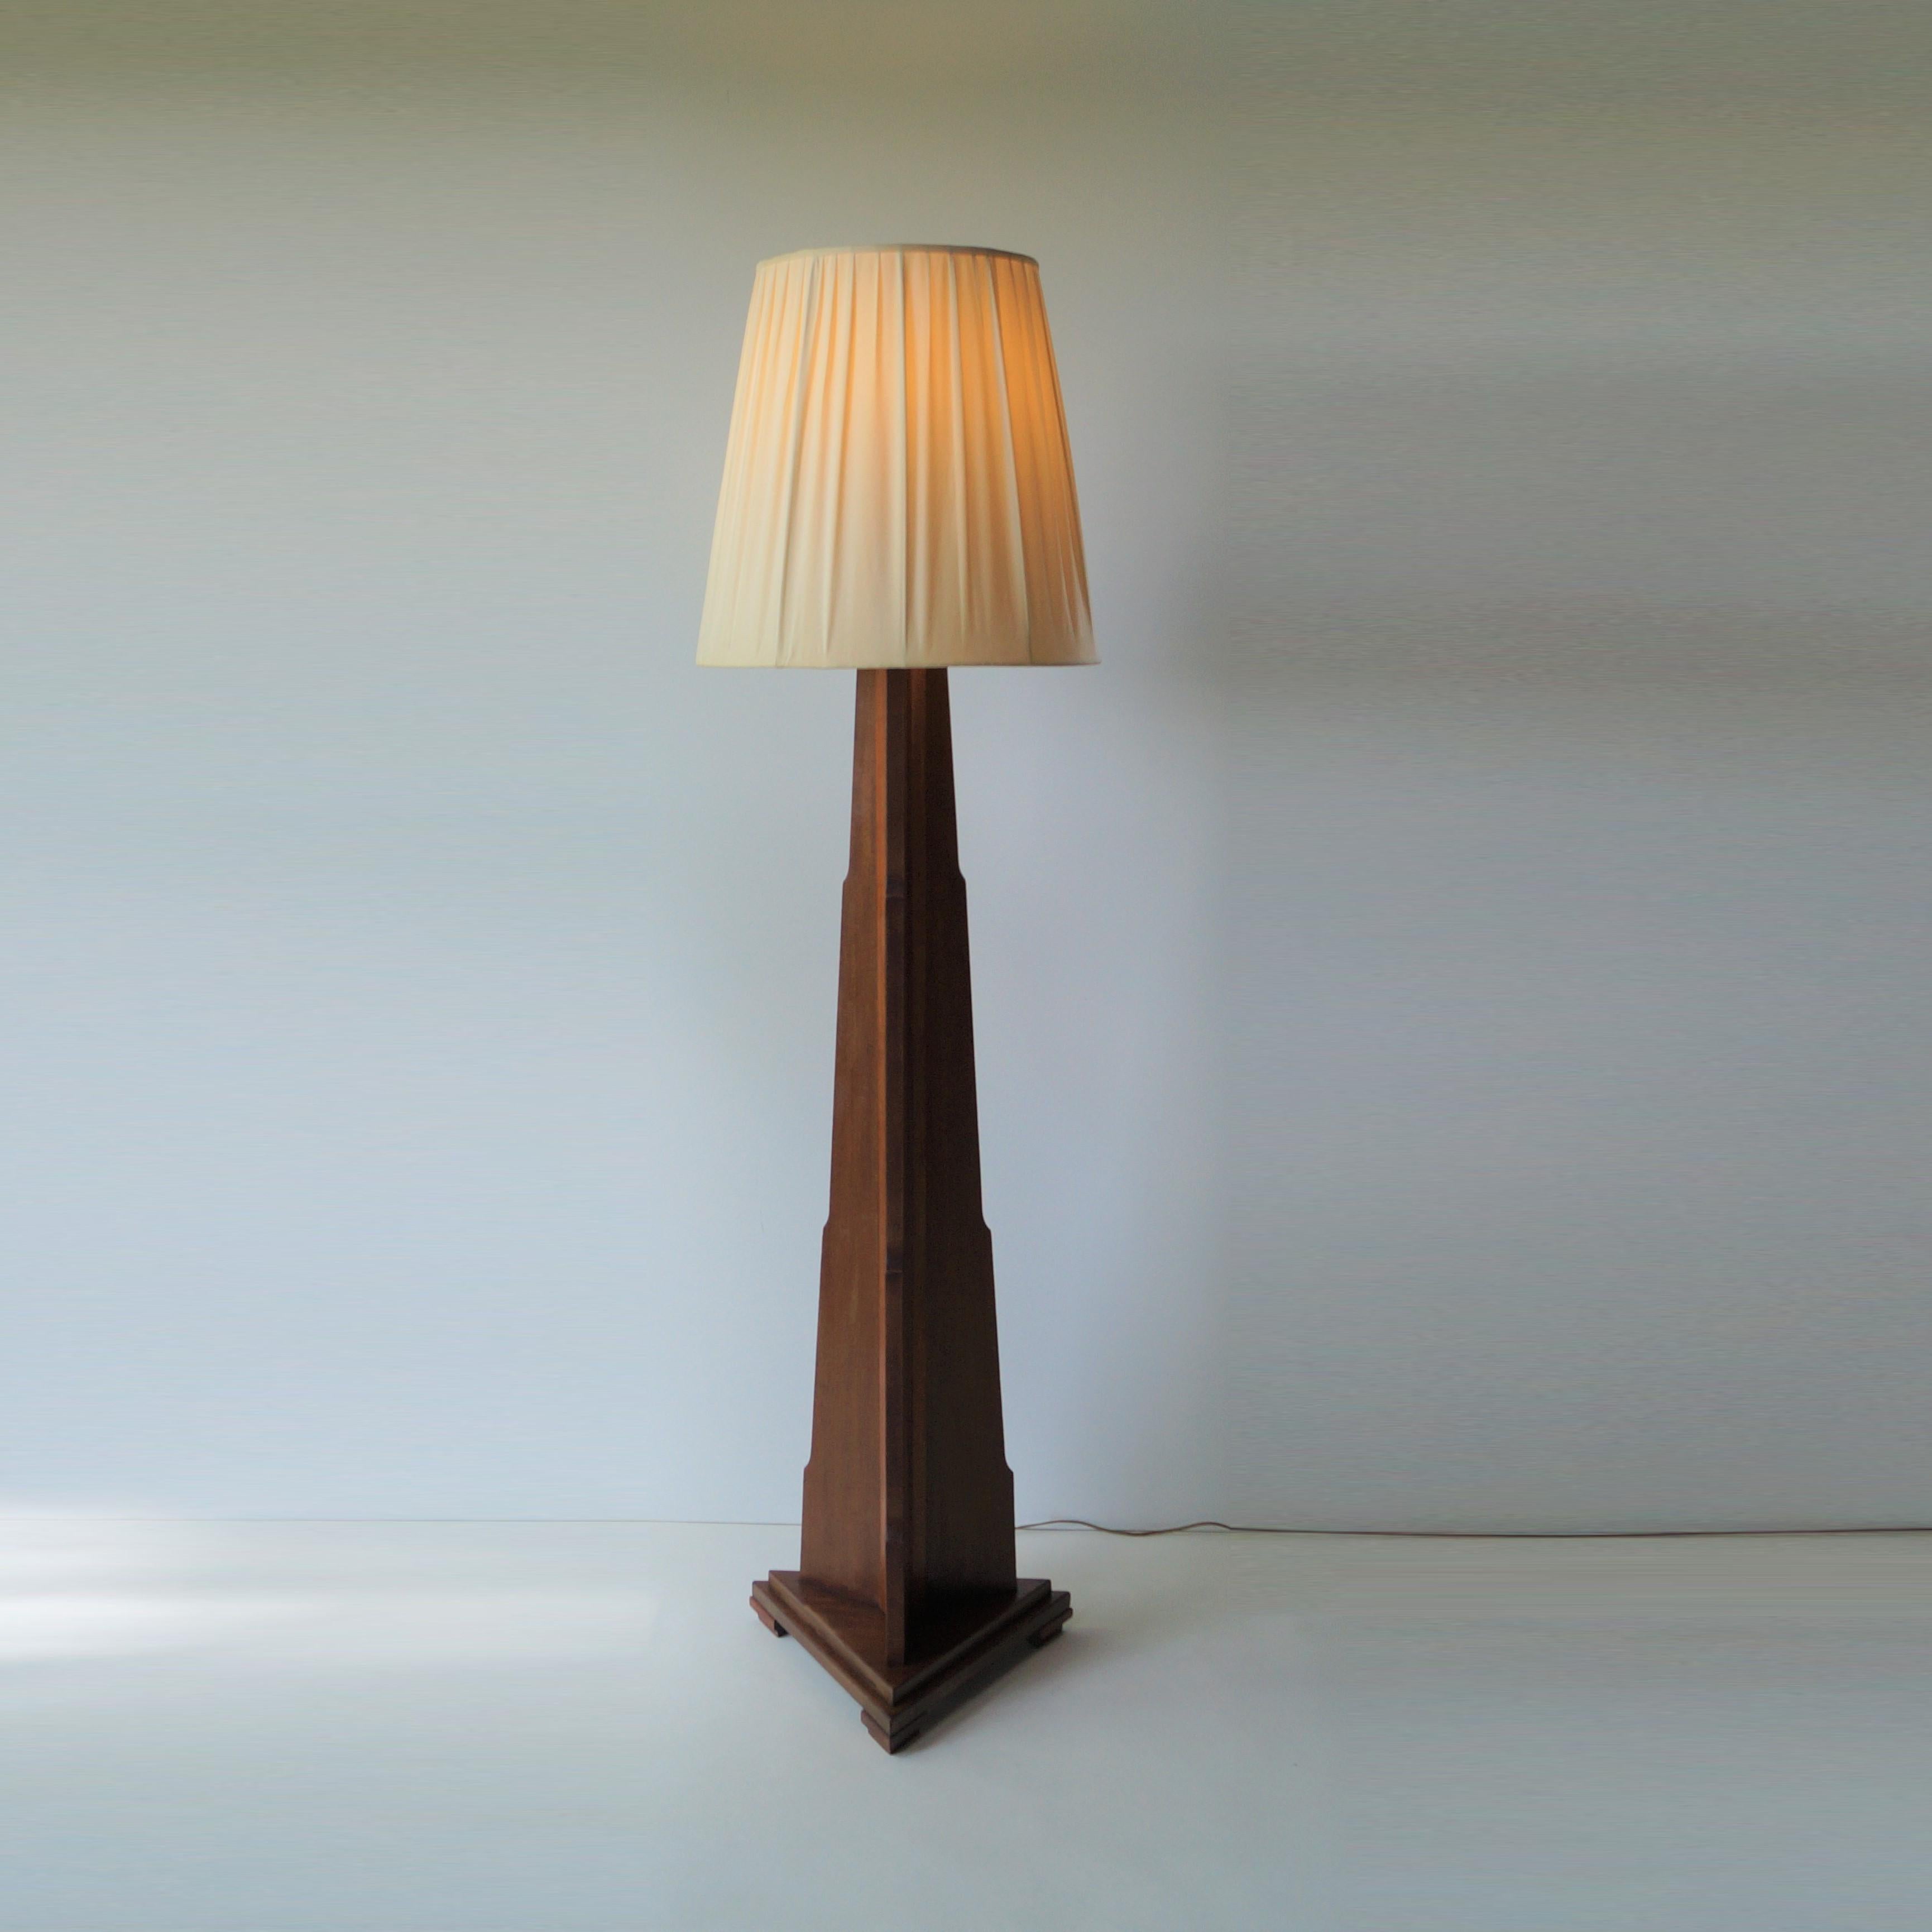 A remarkably large Dutch 1920s - 1930s floorlamp with a modernist design, with some characteristics of the Amsterdamse/Haagse School. In solid mahogany with a triangular base and woodcarved stepped design on the three sides. Made from mahogany.